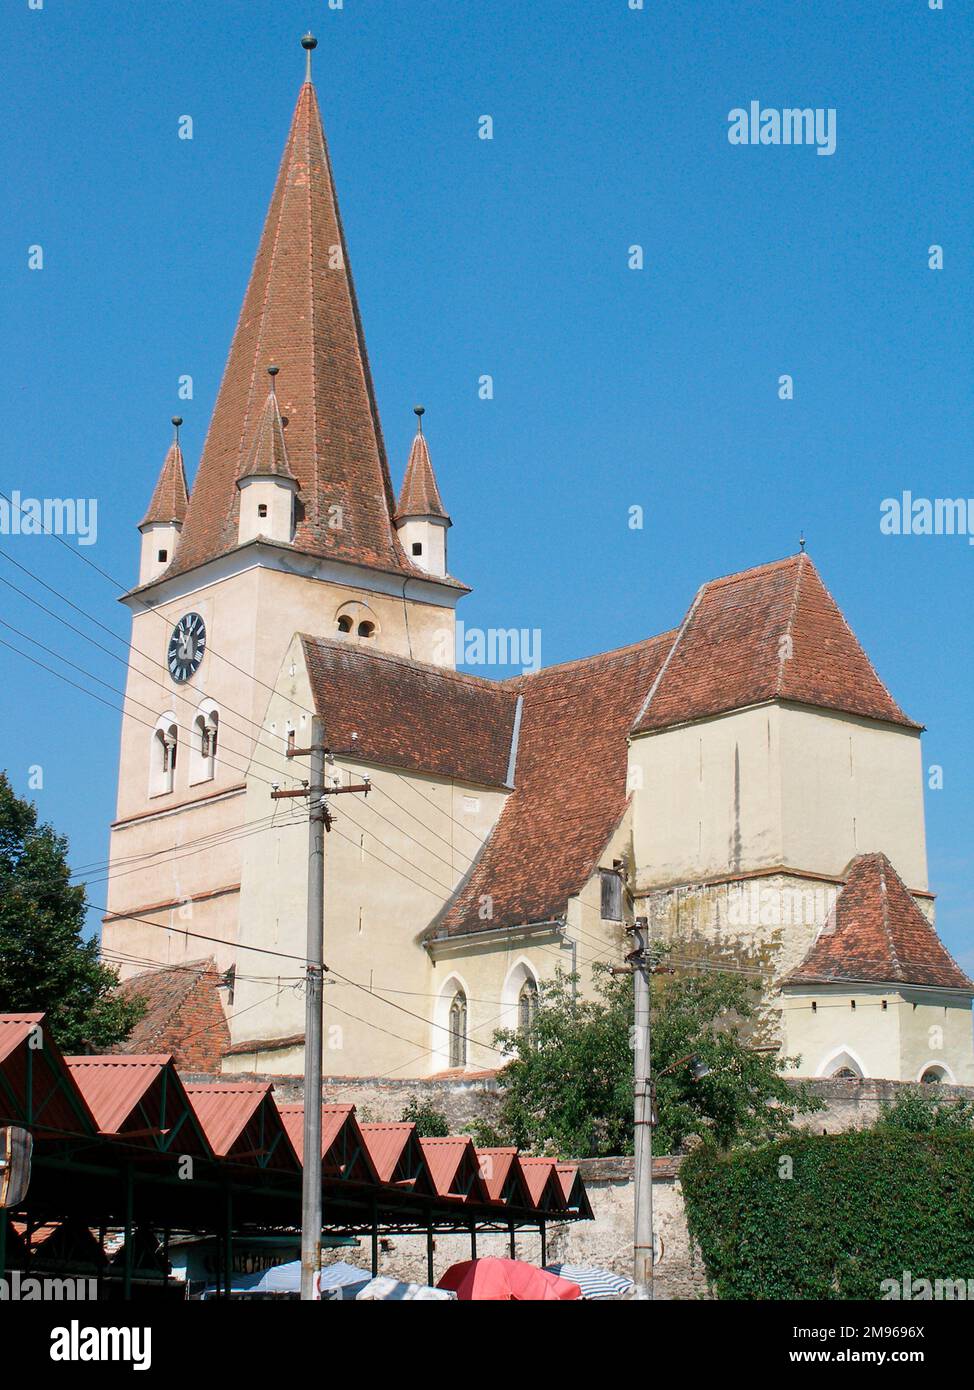 View of a medieval fortified church in Cisnadie (Heltau), Sibiu, in Transylvania, Romania, with a street market just visible below.  The church was built in the 12th century and fortified in the 15th. Stock Photo